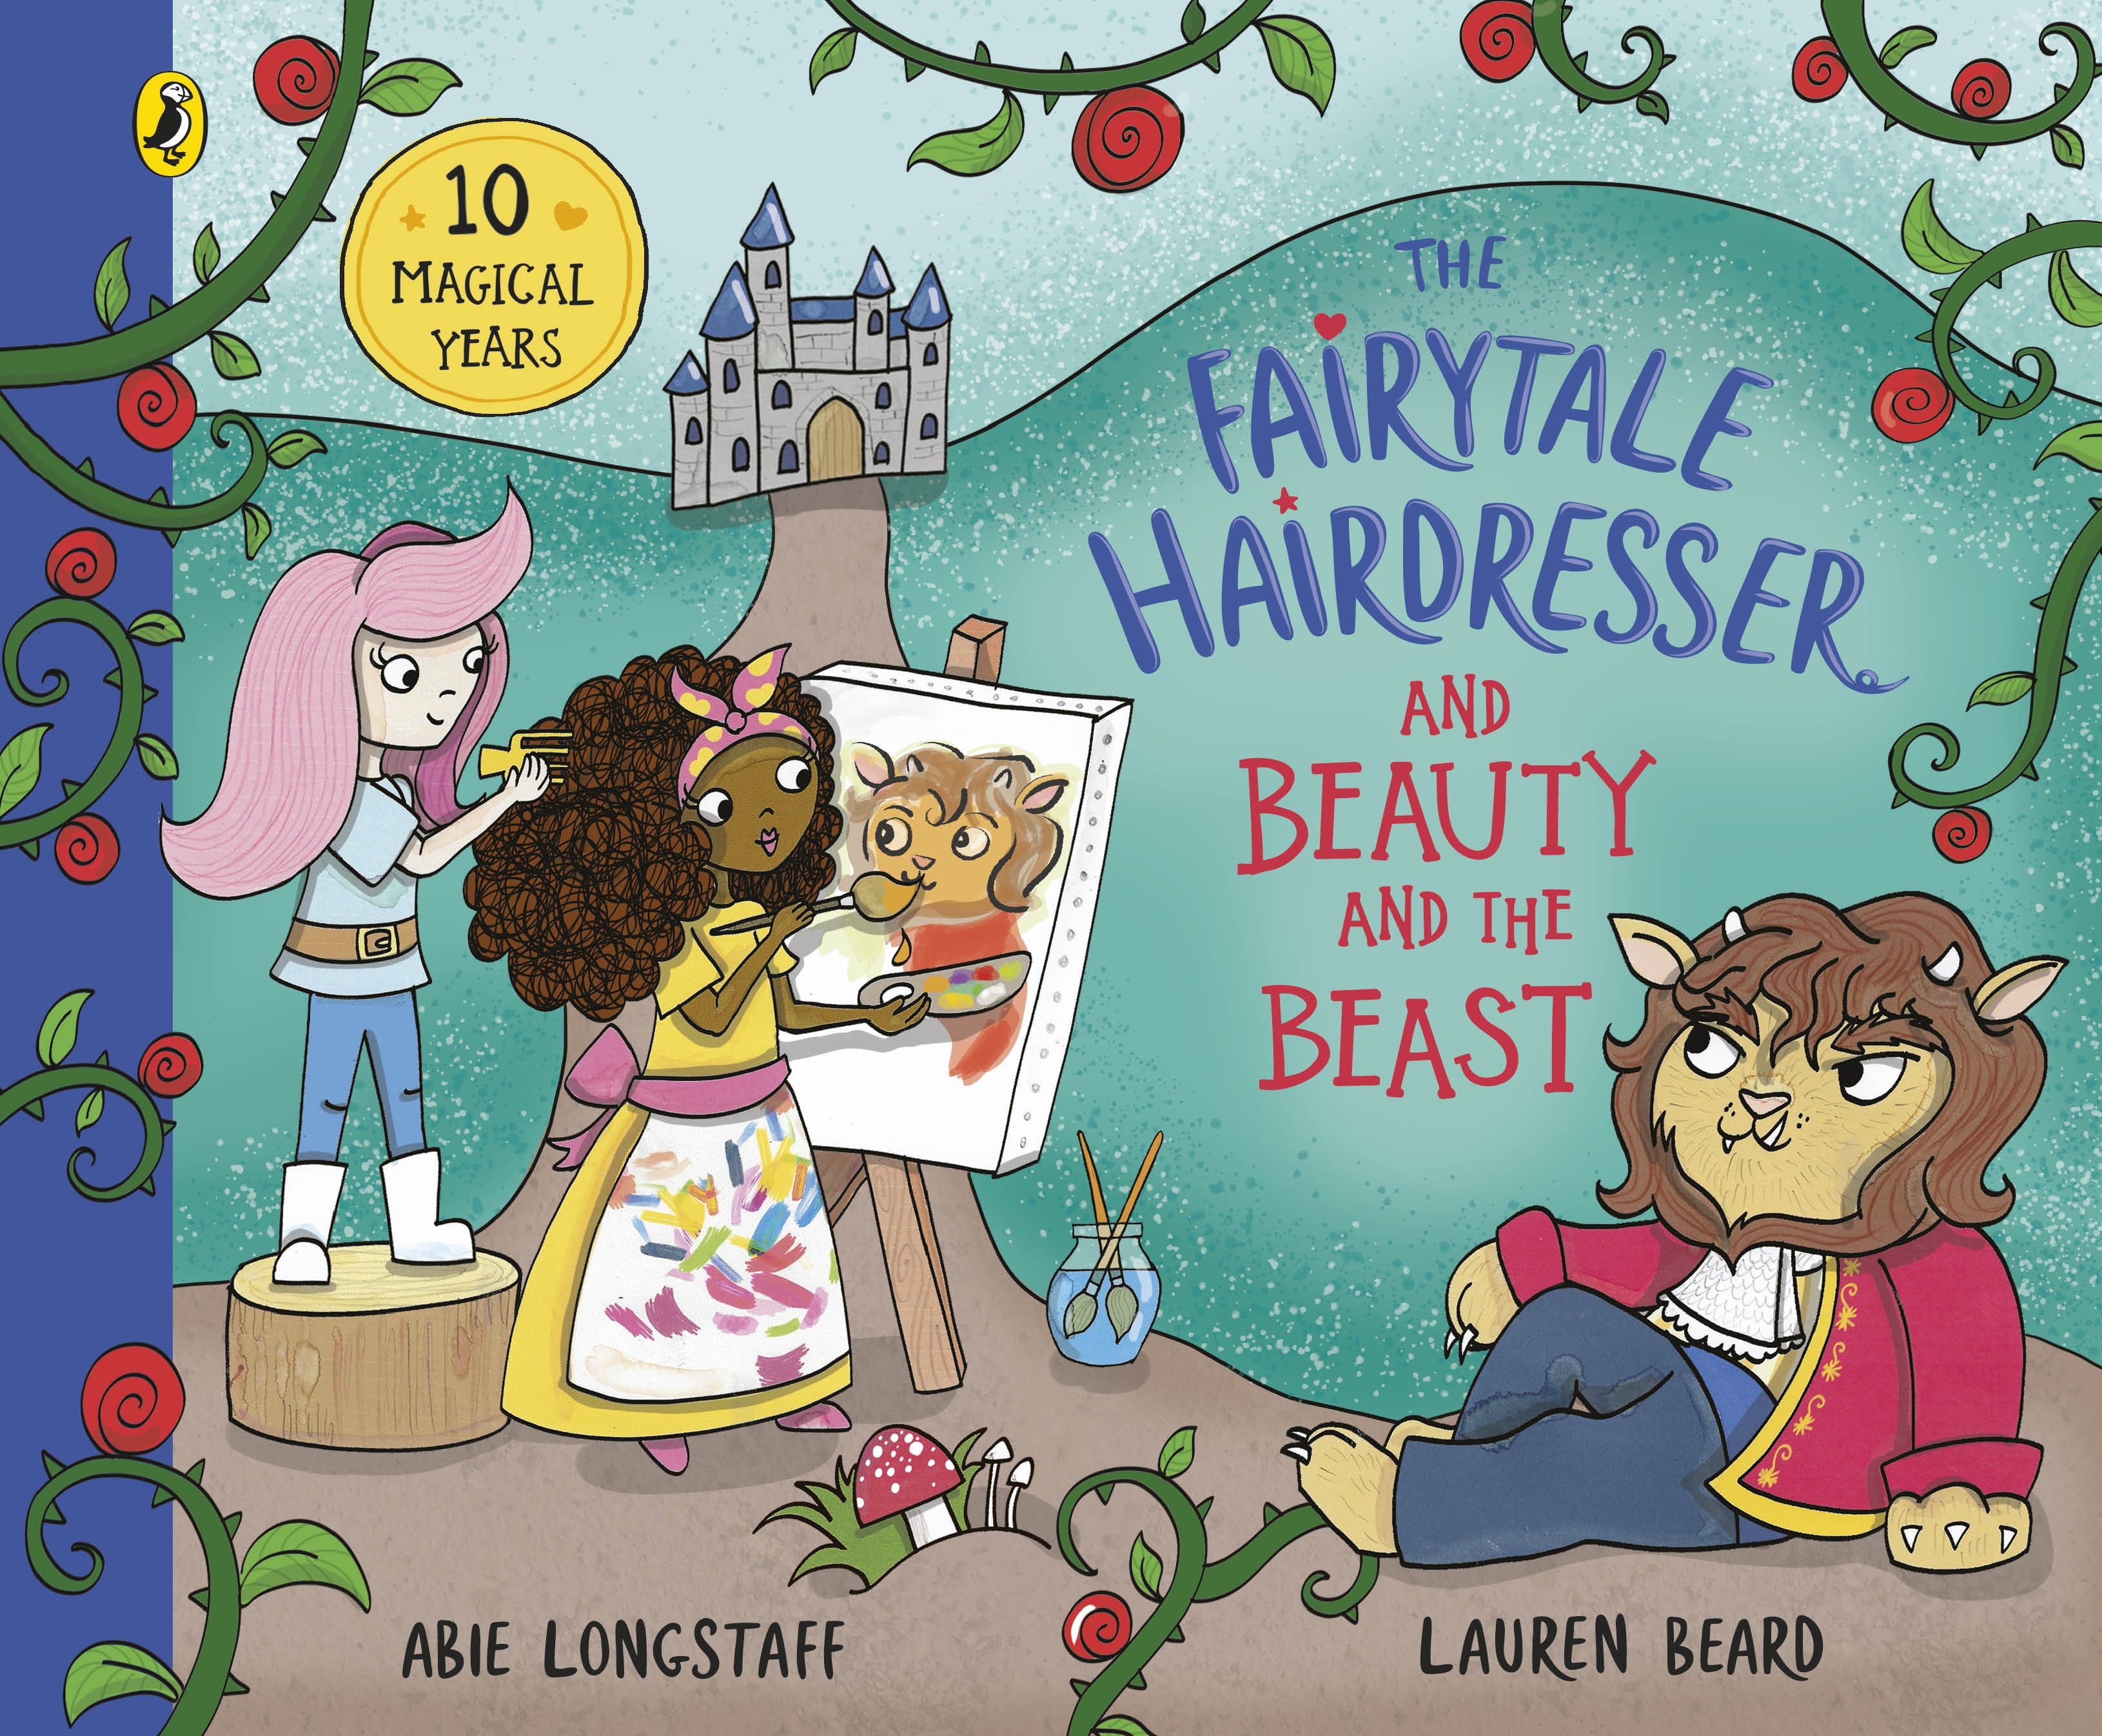 Book “The Fairytale Hairdresser and Beauty and the Beast” by Abie Longstaff — September 30, 2021